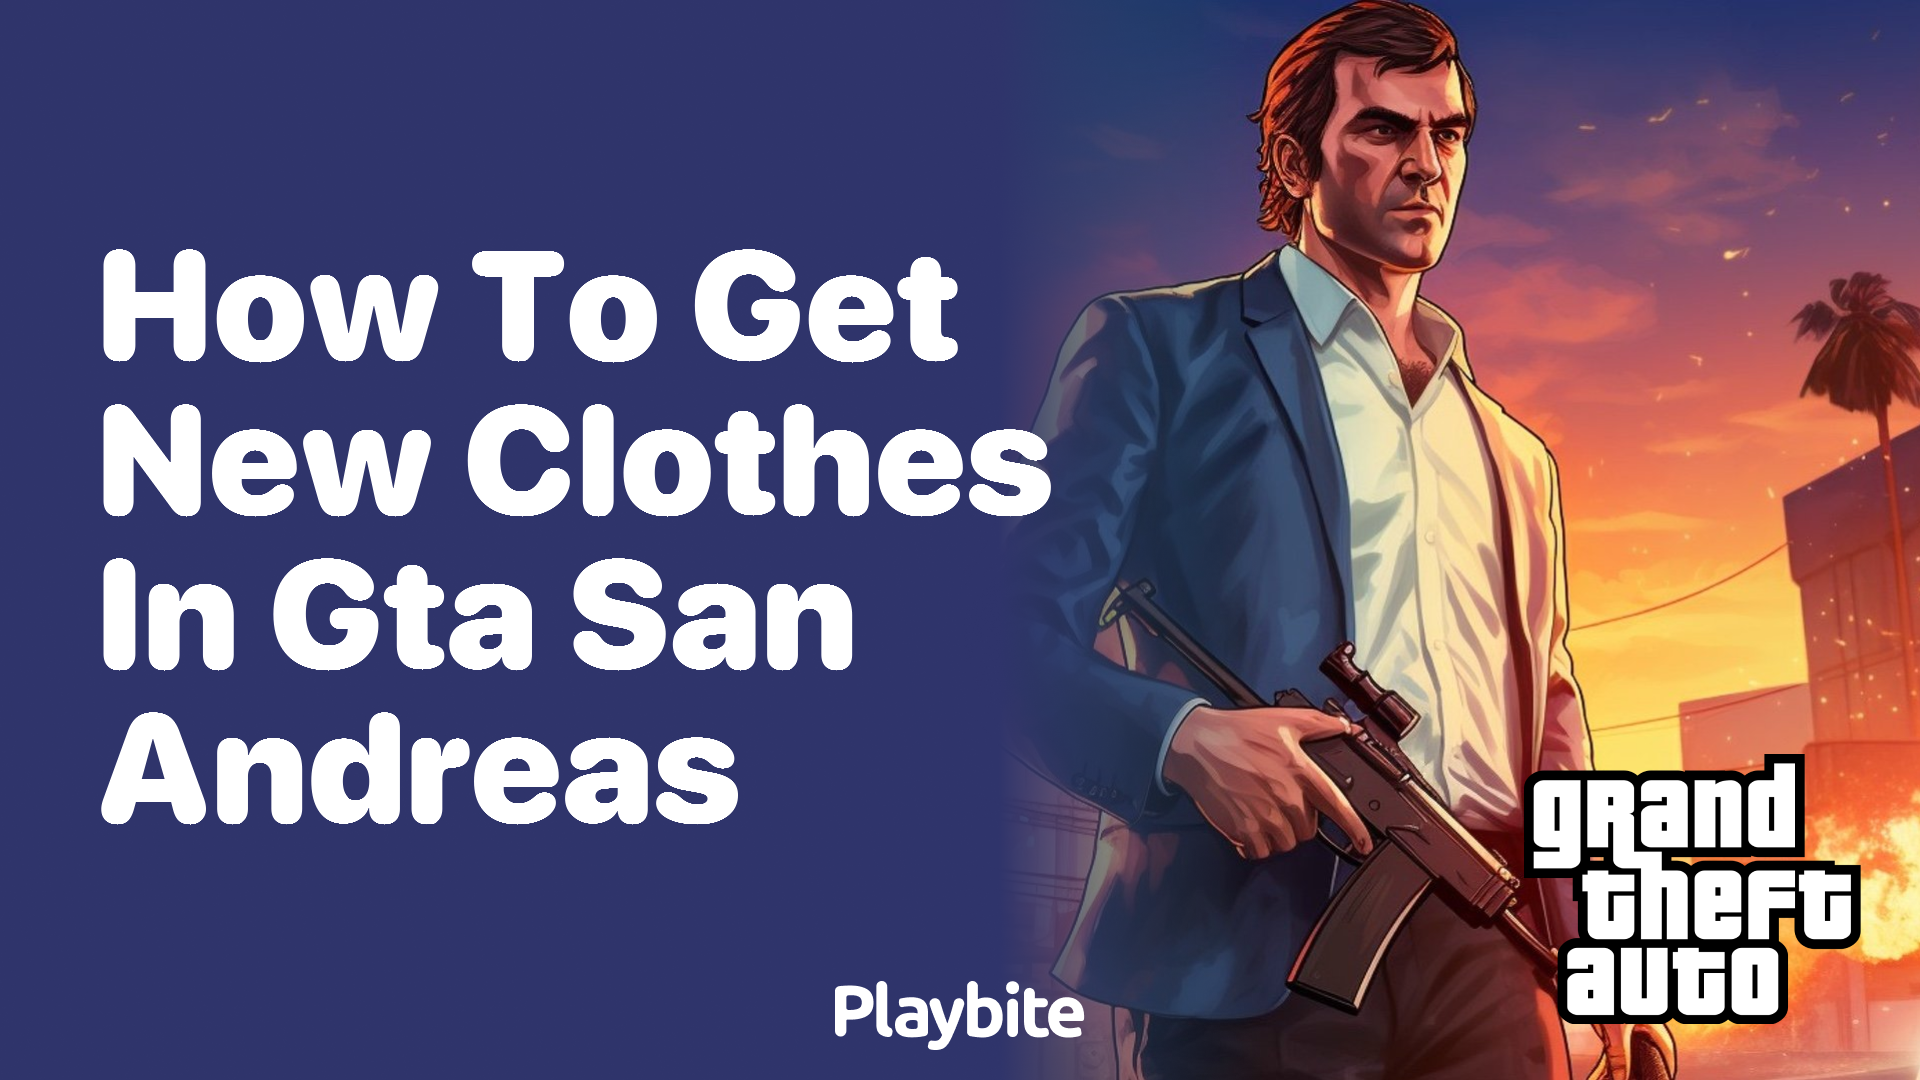 How to get new clothes in GTA San Andreas